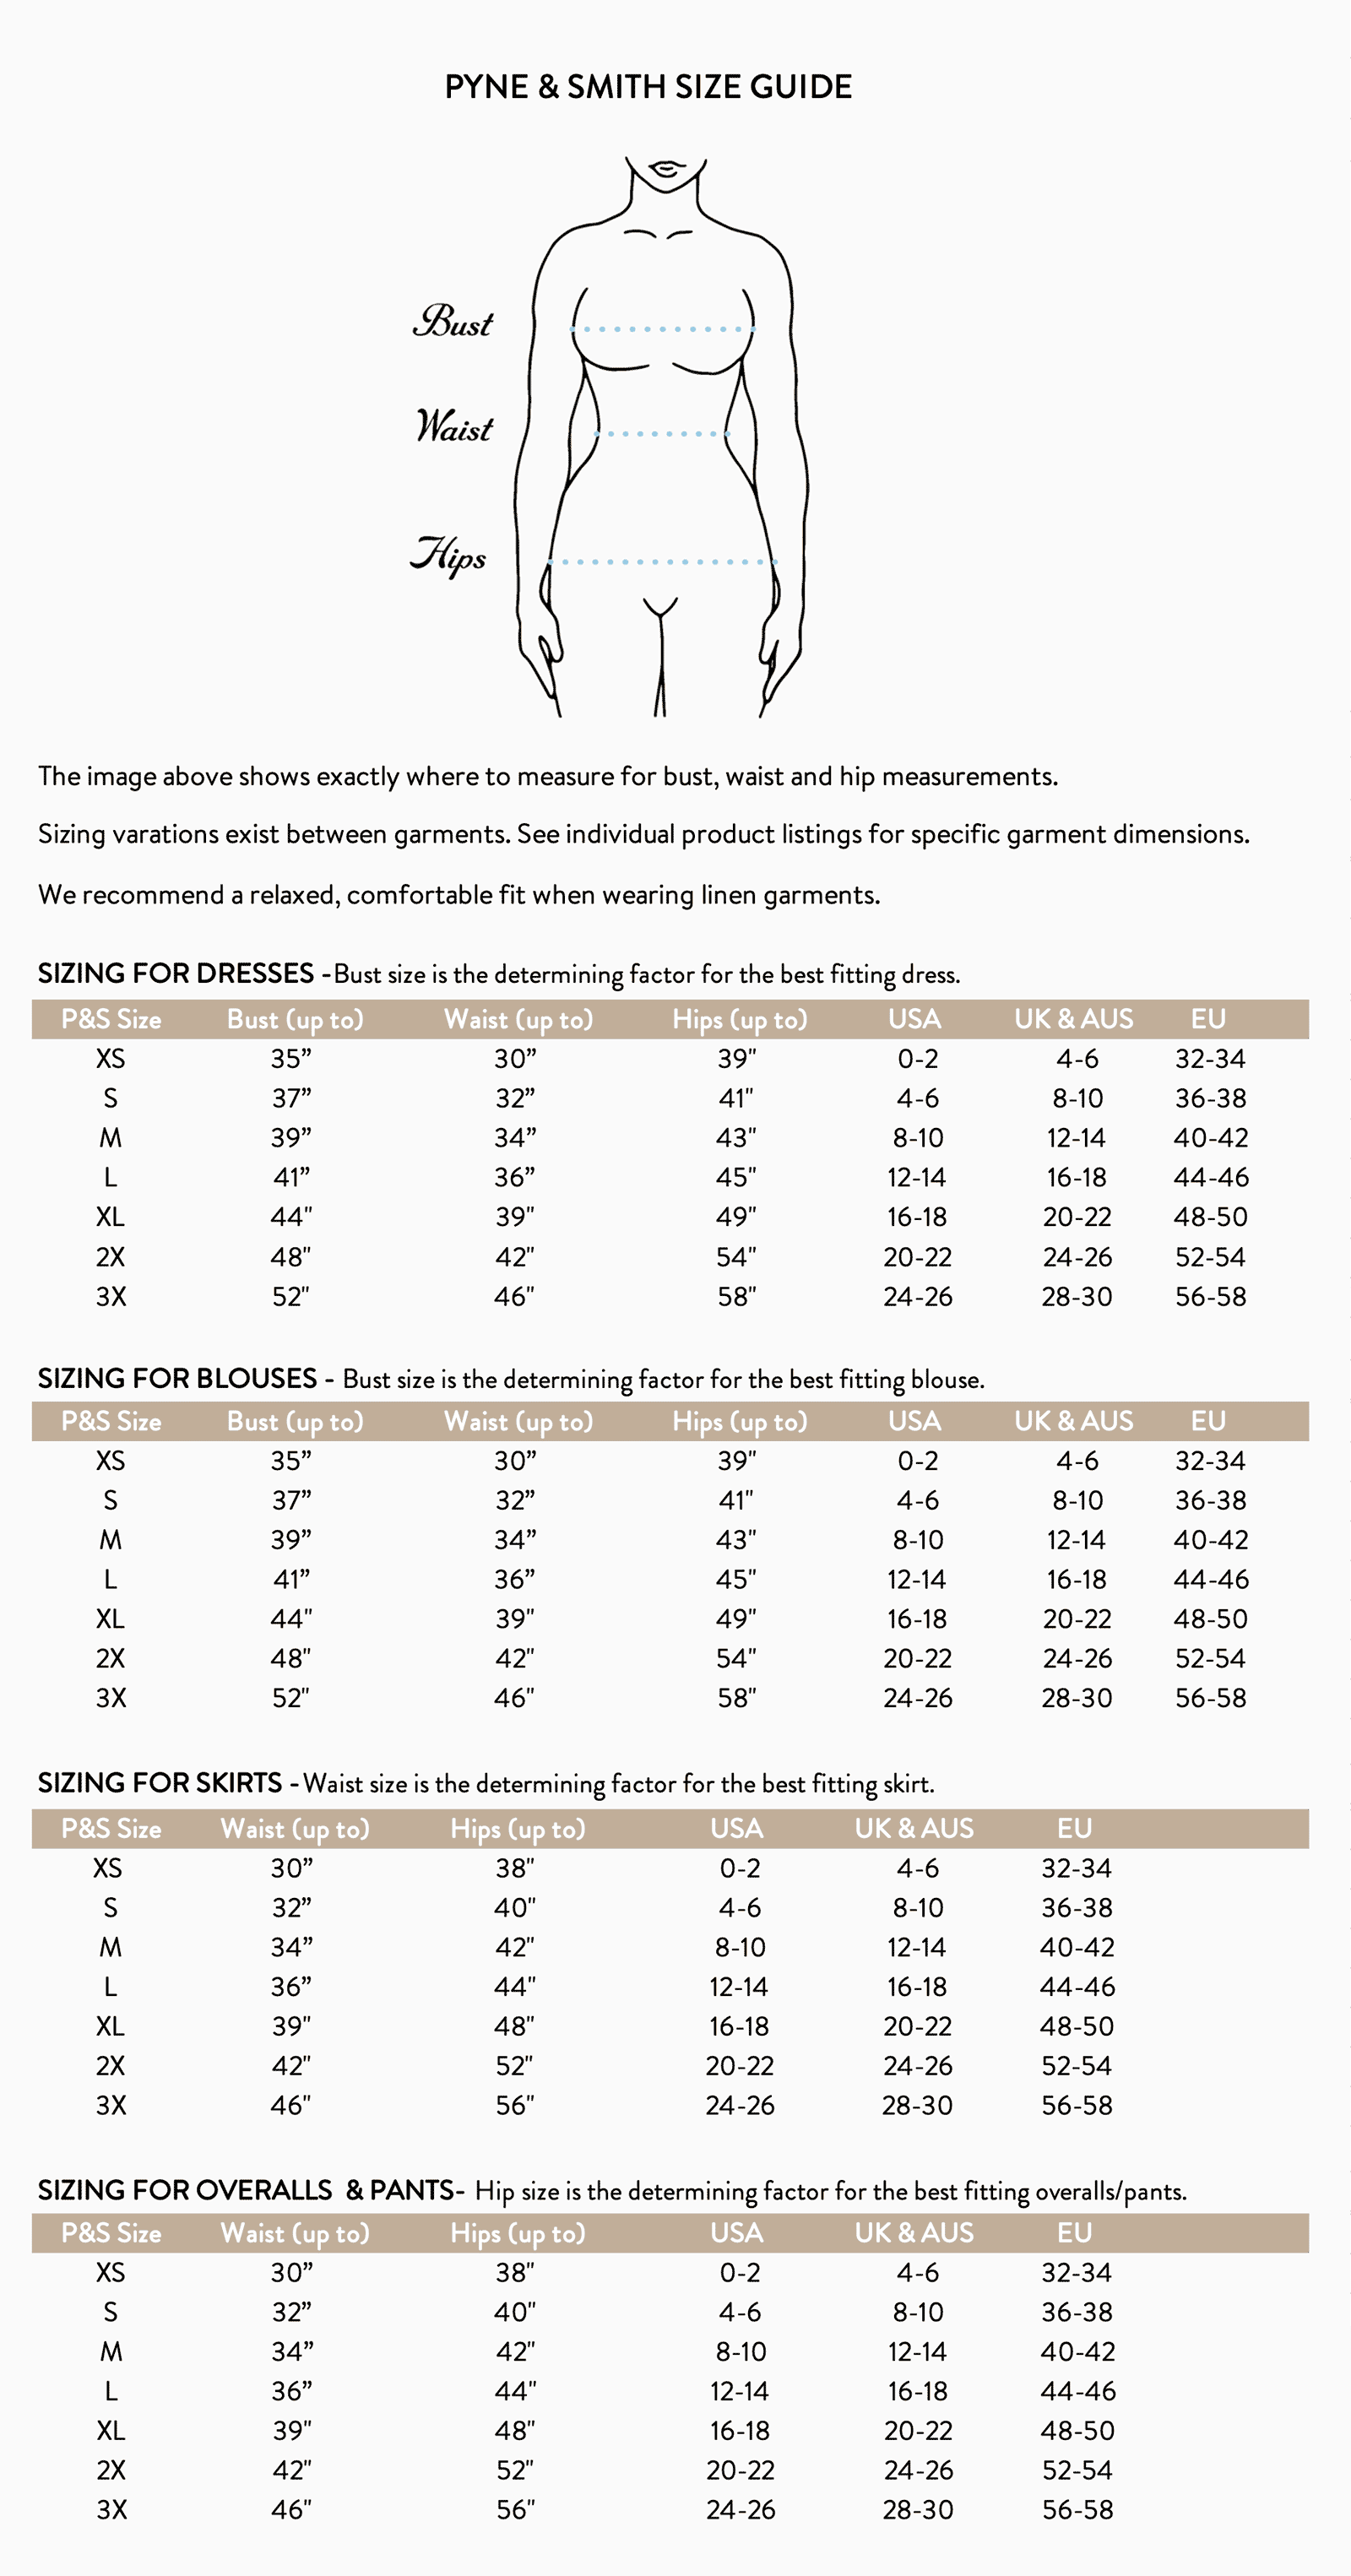 Pyne and Smith size guide